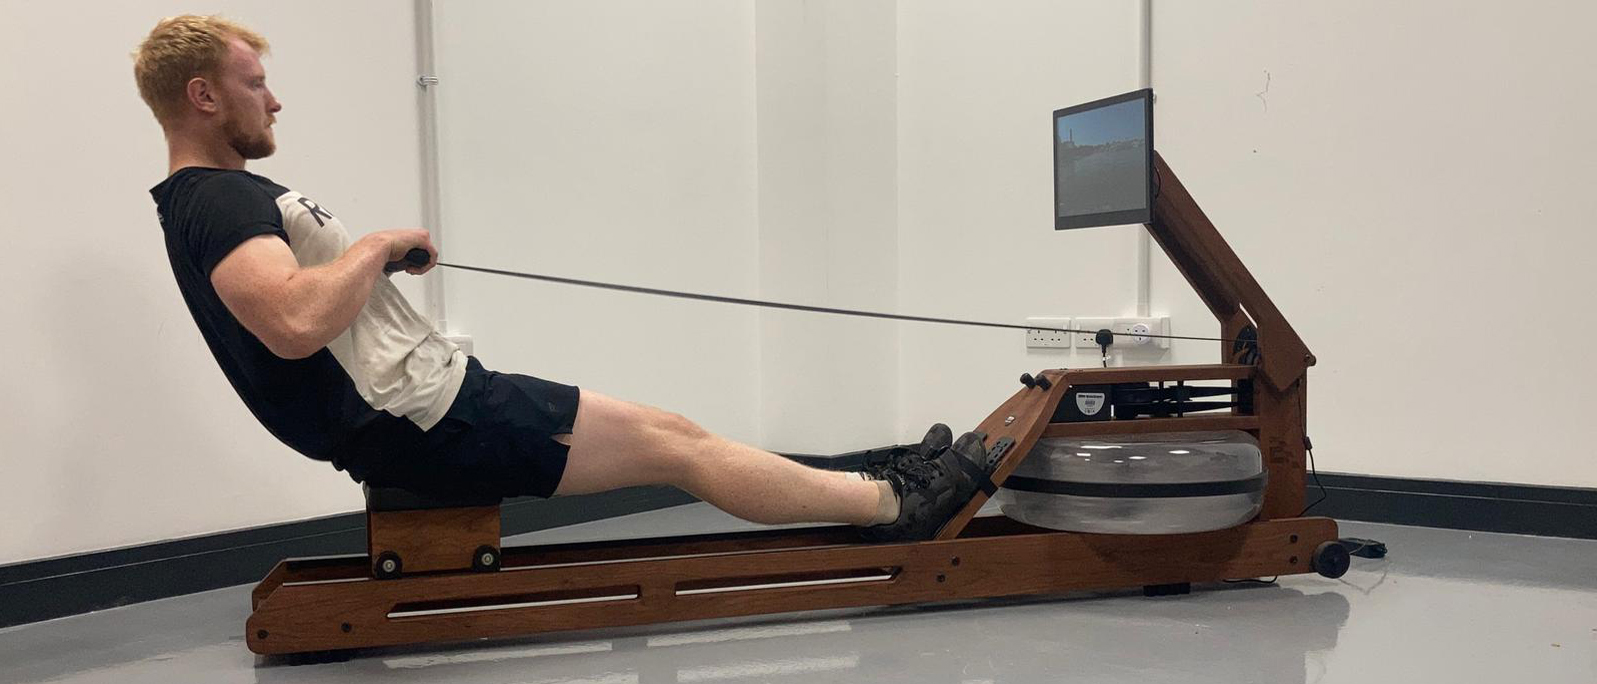 Ergatta Rower being tested by Live Science writer